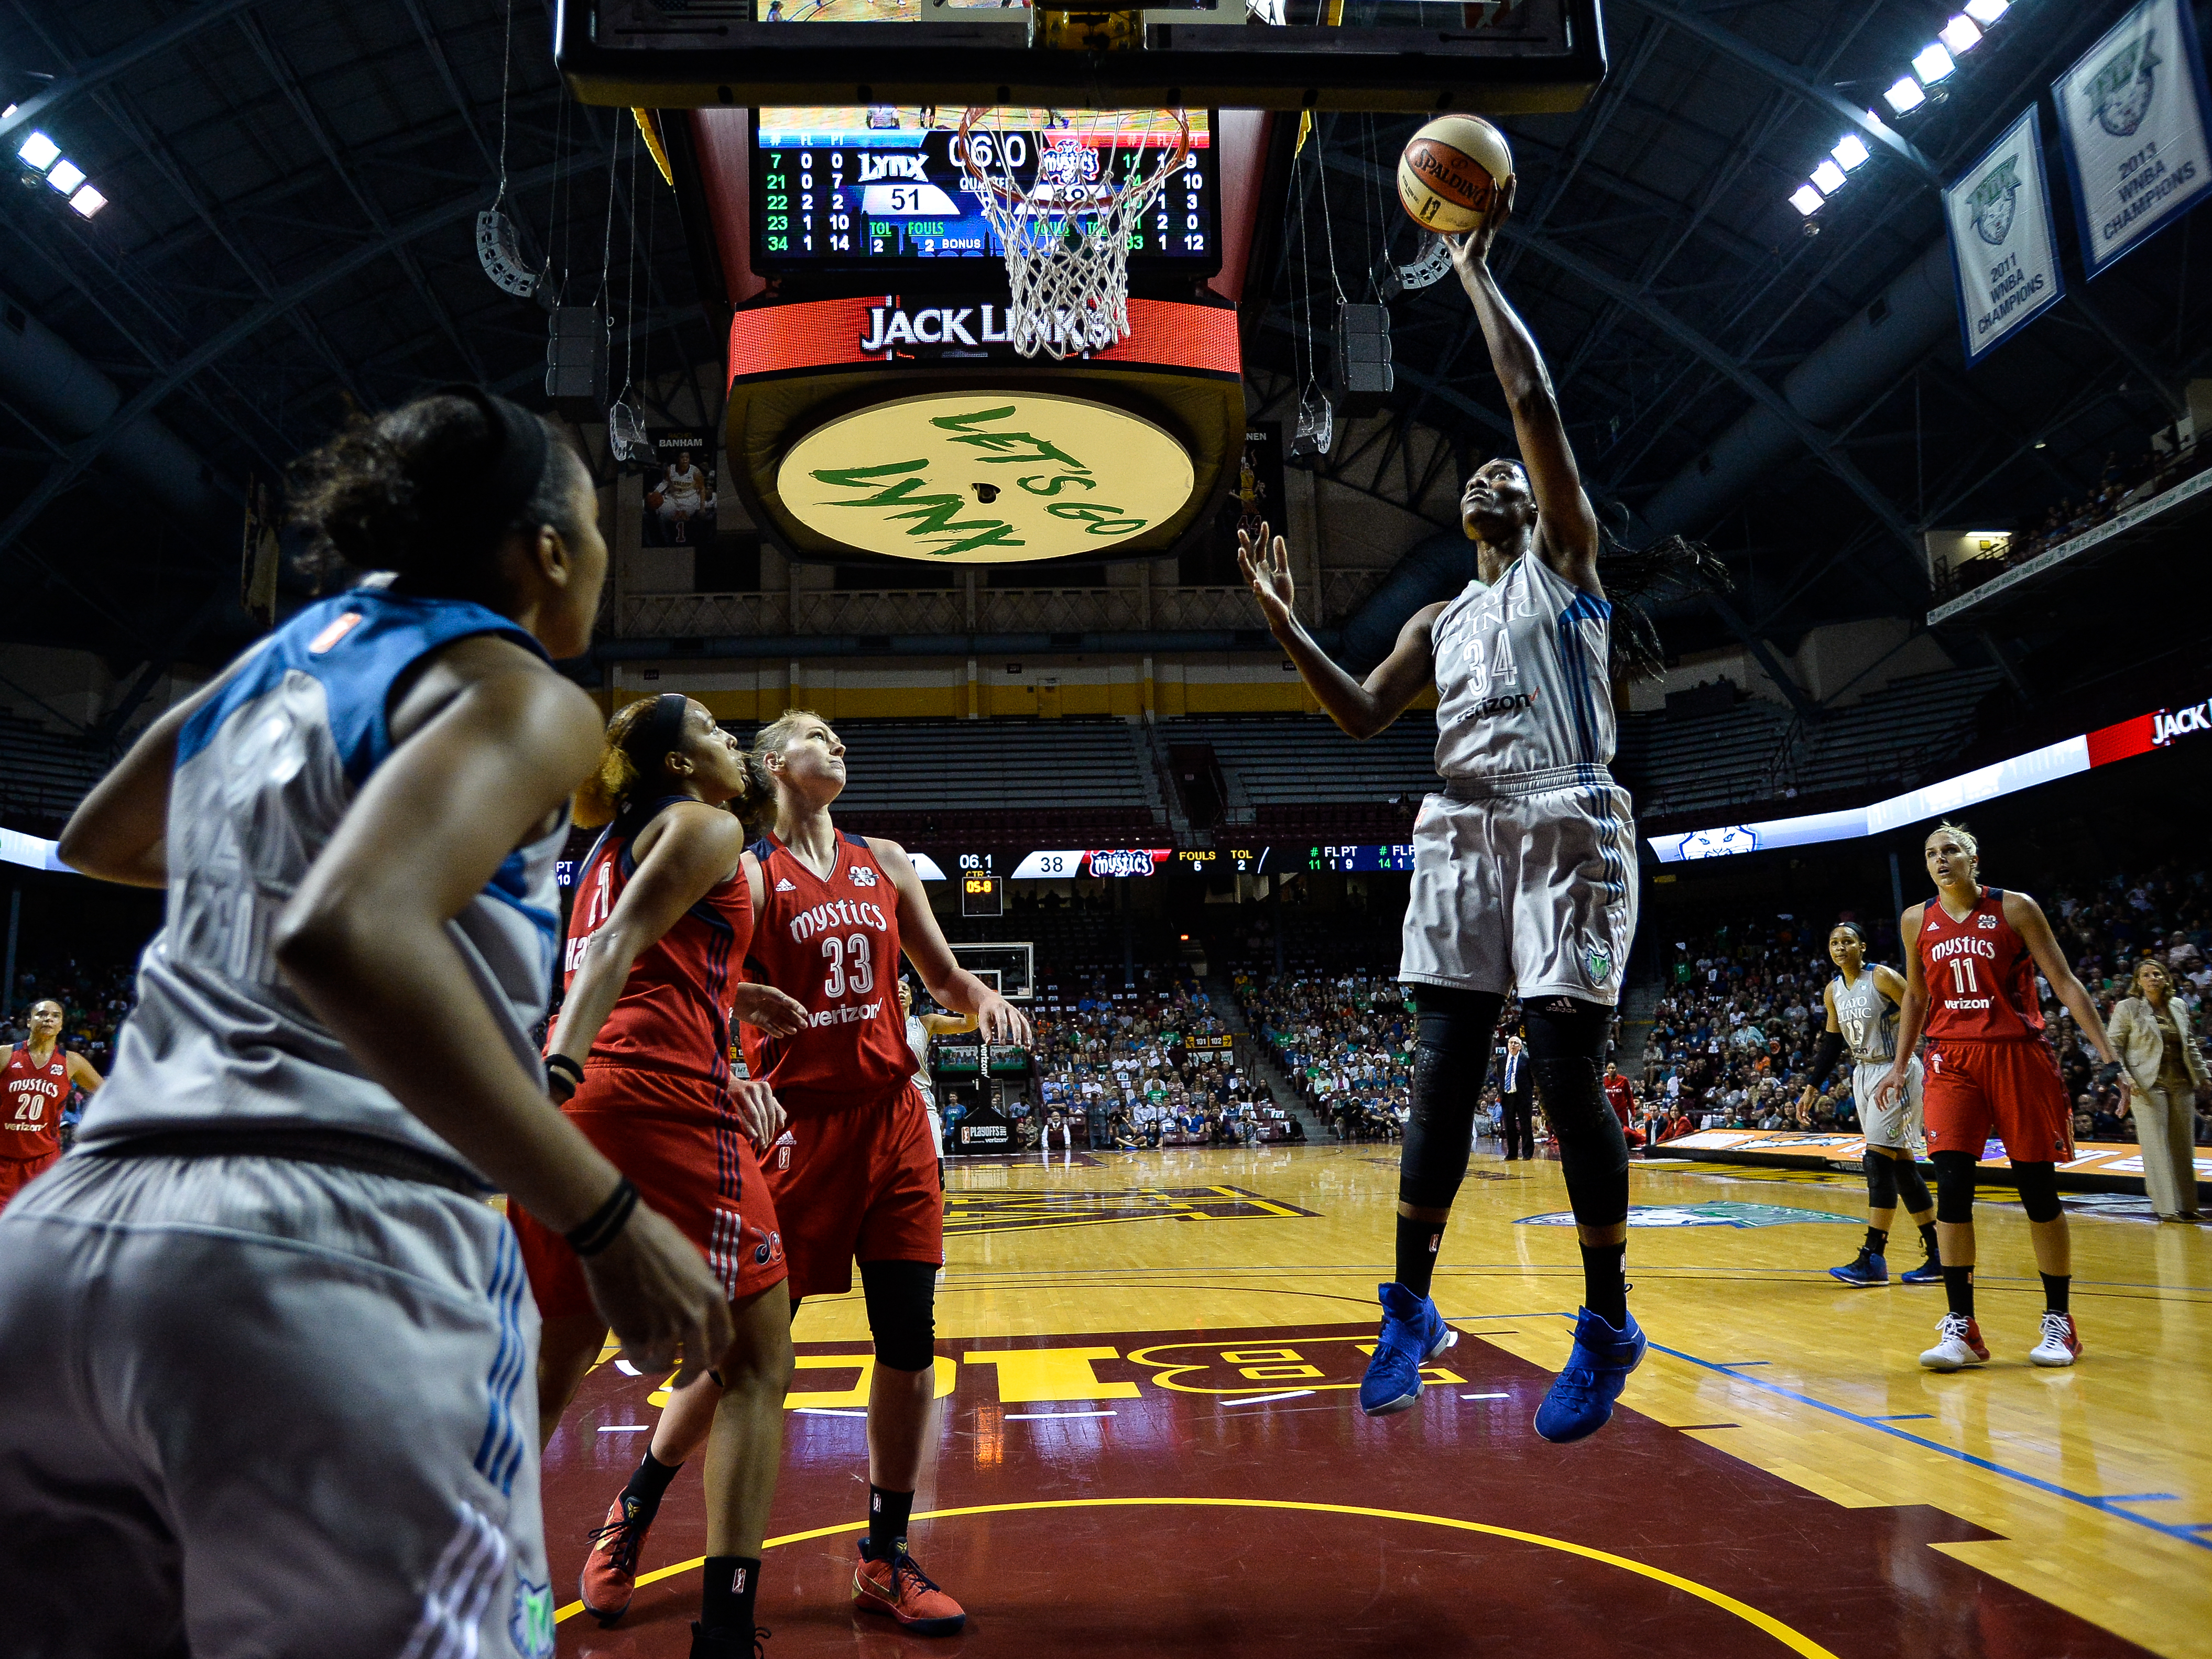 Minnesota Lynx center Sylvia Fowles (34) scored a basket in the final seconds of the second quarter against the Washington Mystics. She scored 16 in t